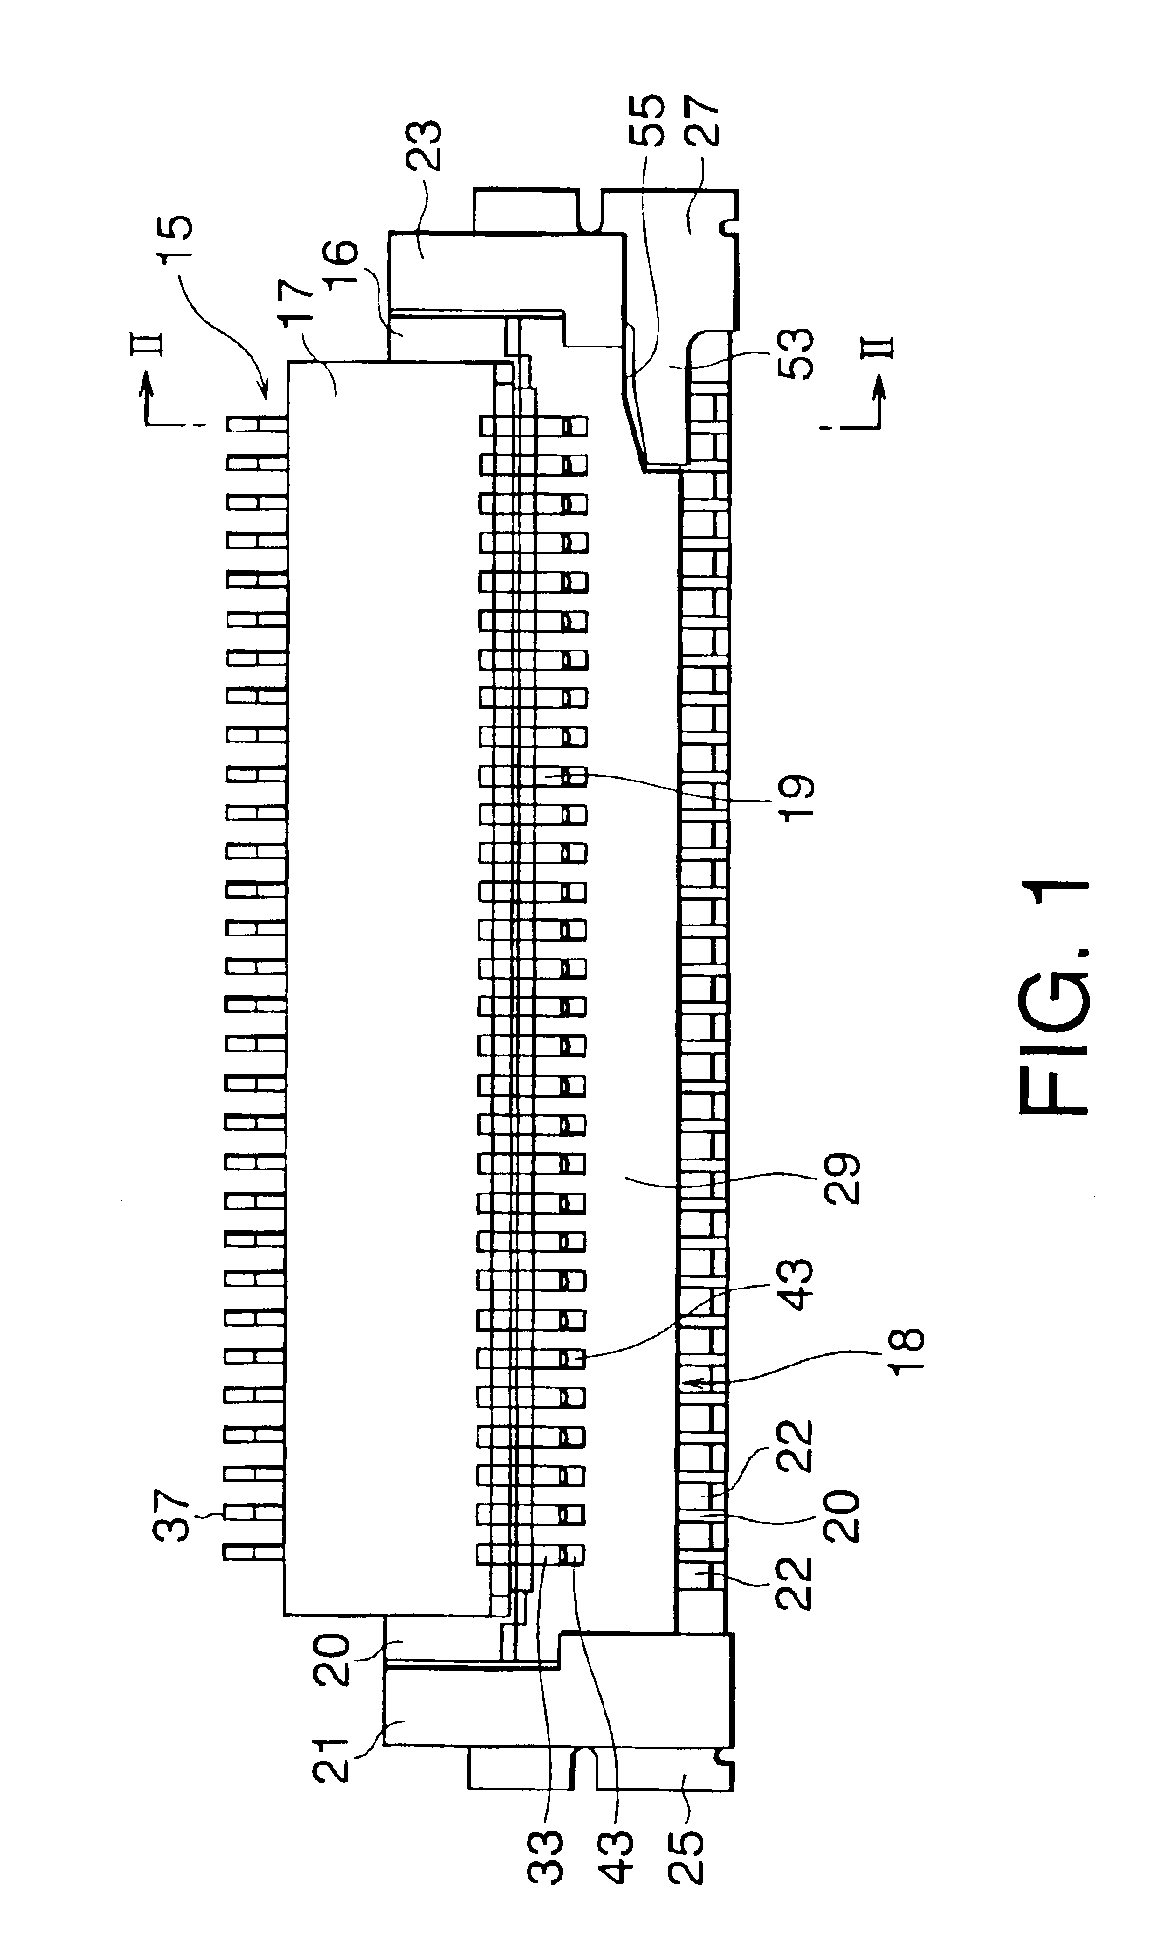 Connector for flexible printed circuit